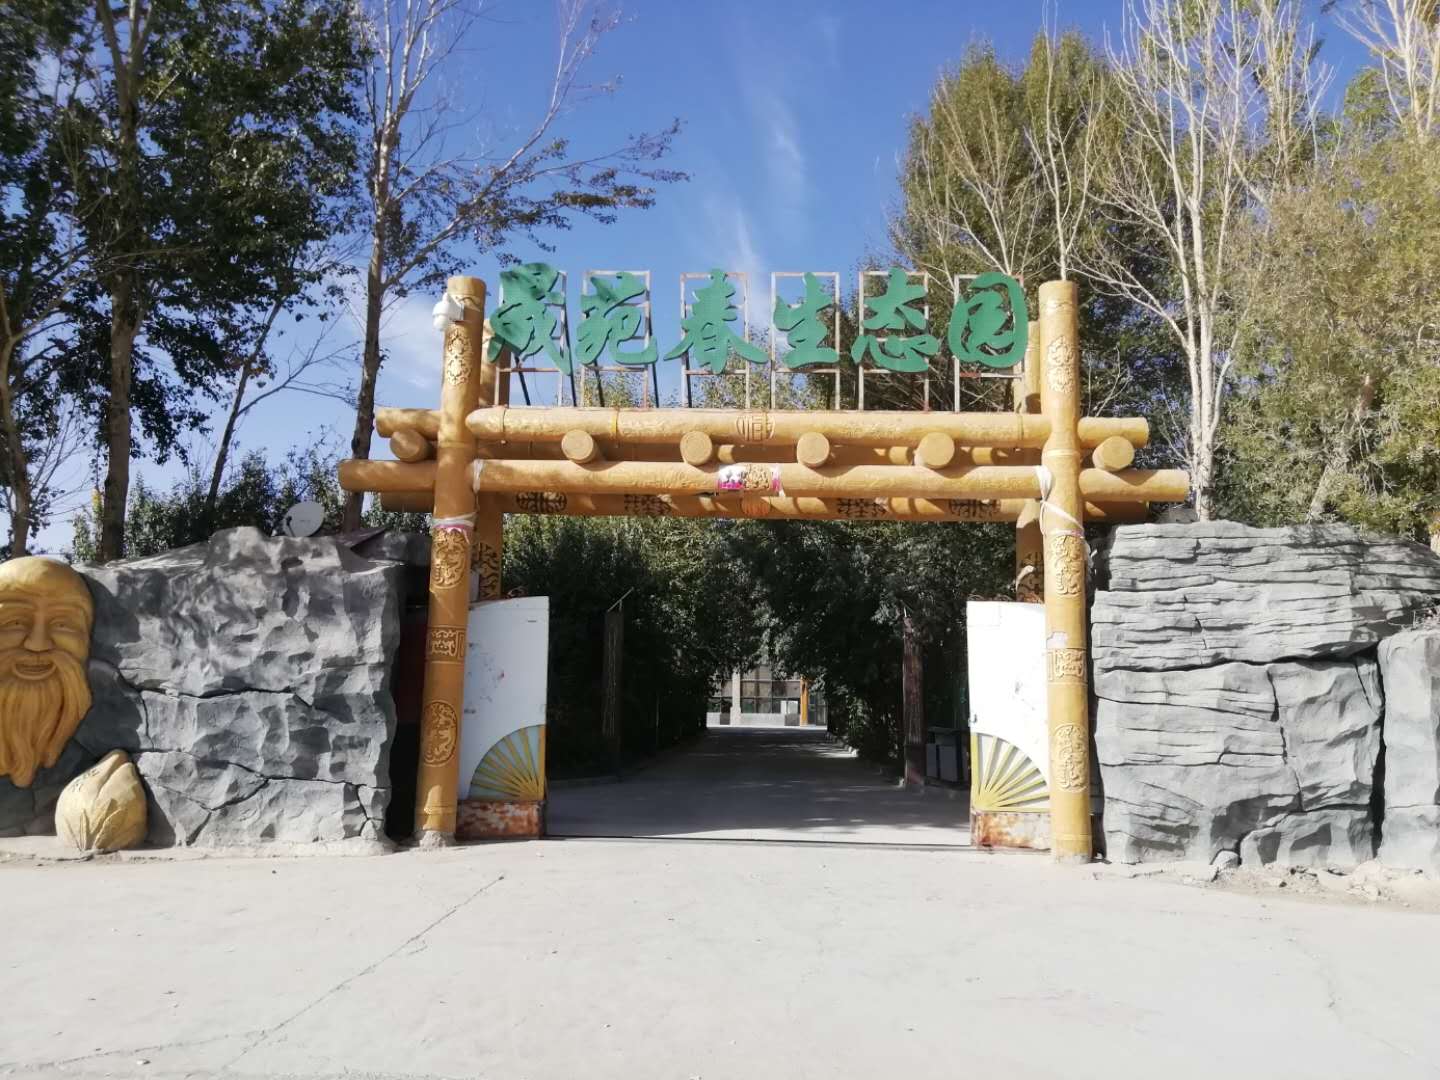  The first commercial land transfer with an area of 15 mu (9610 square meters) in Haixi, Qinghai 